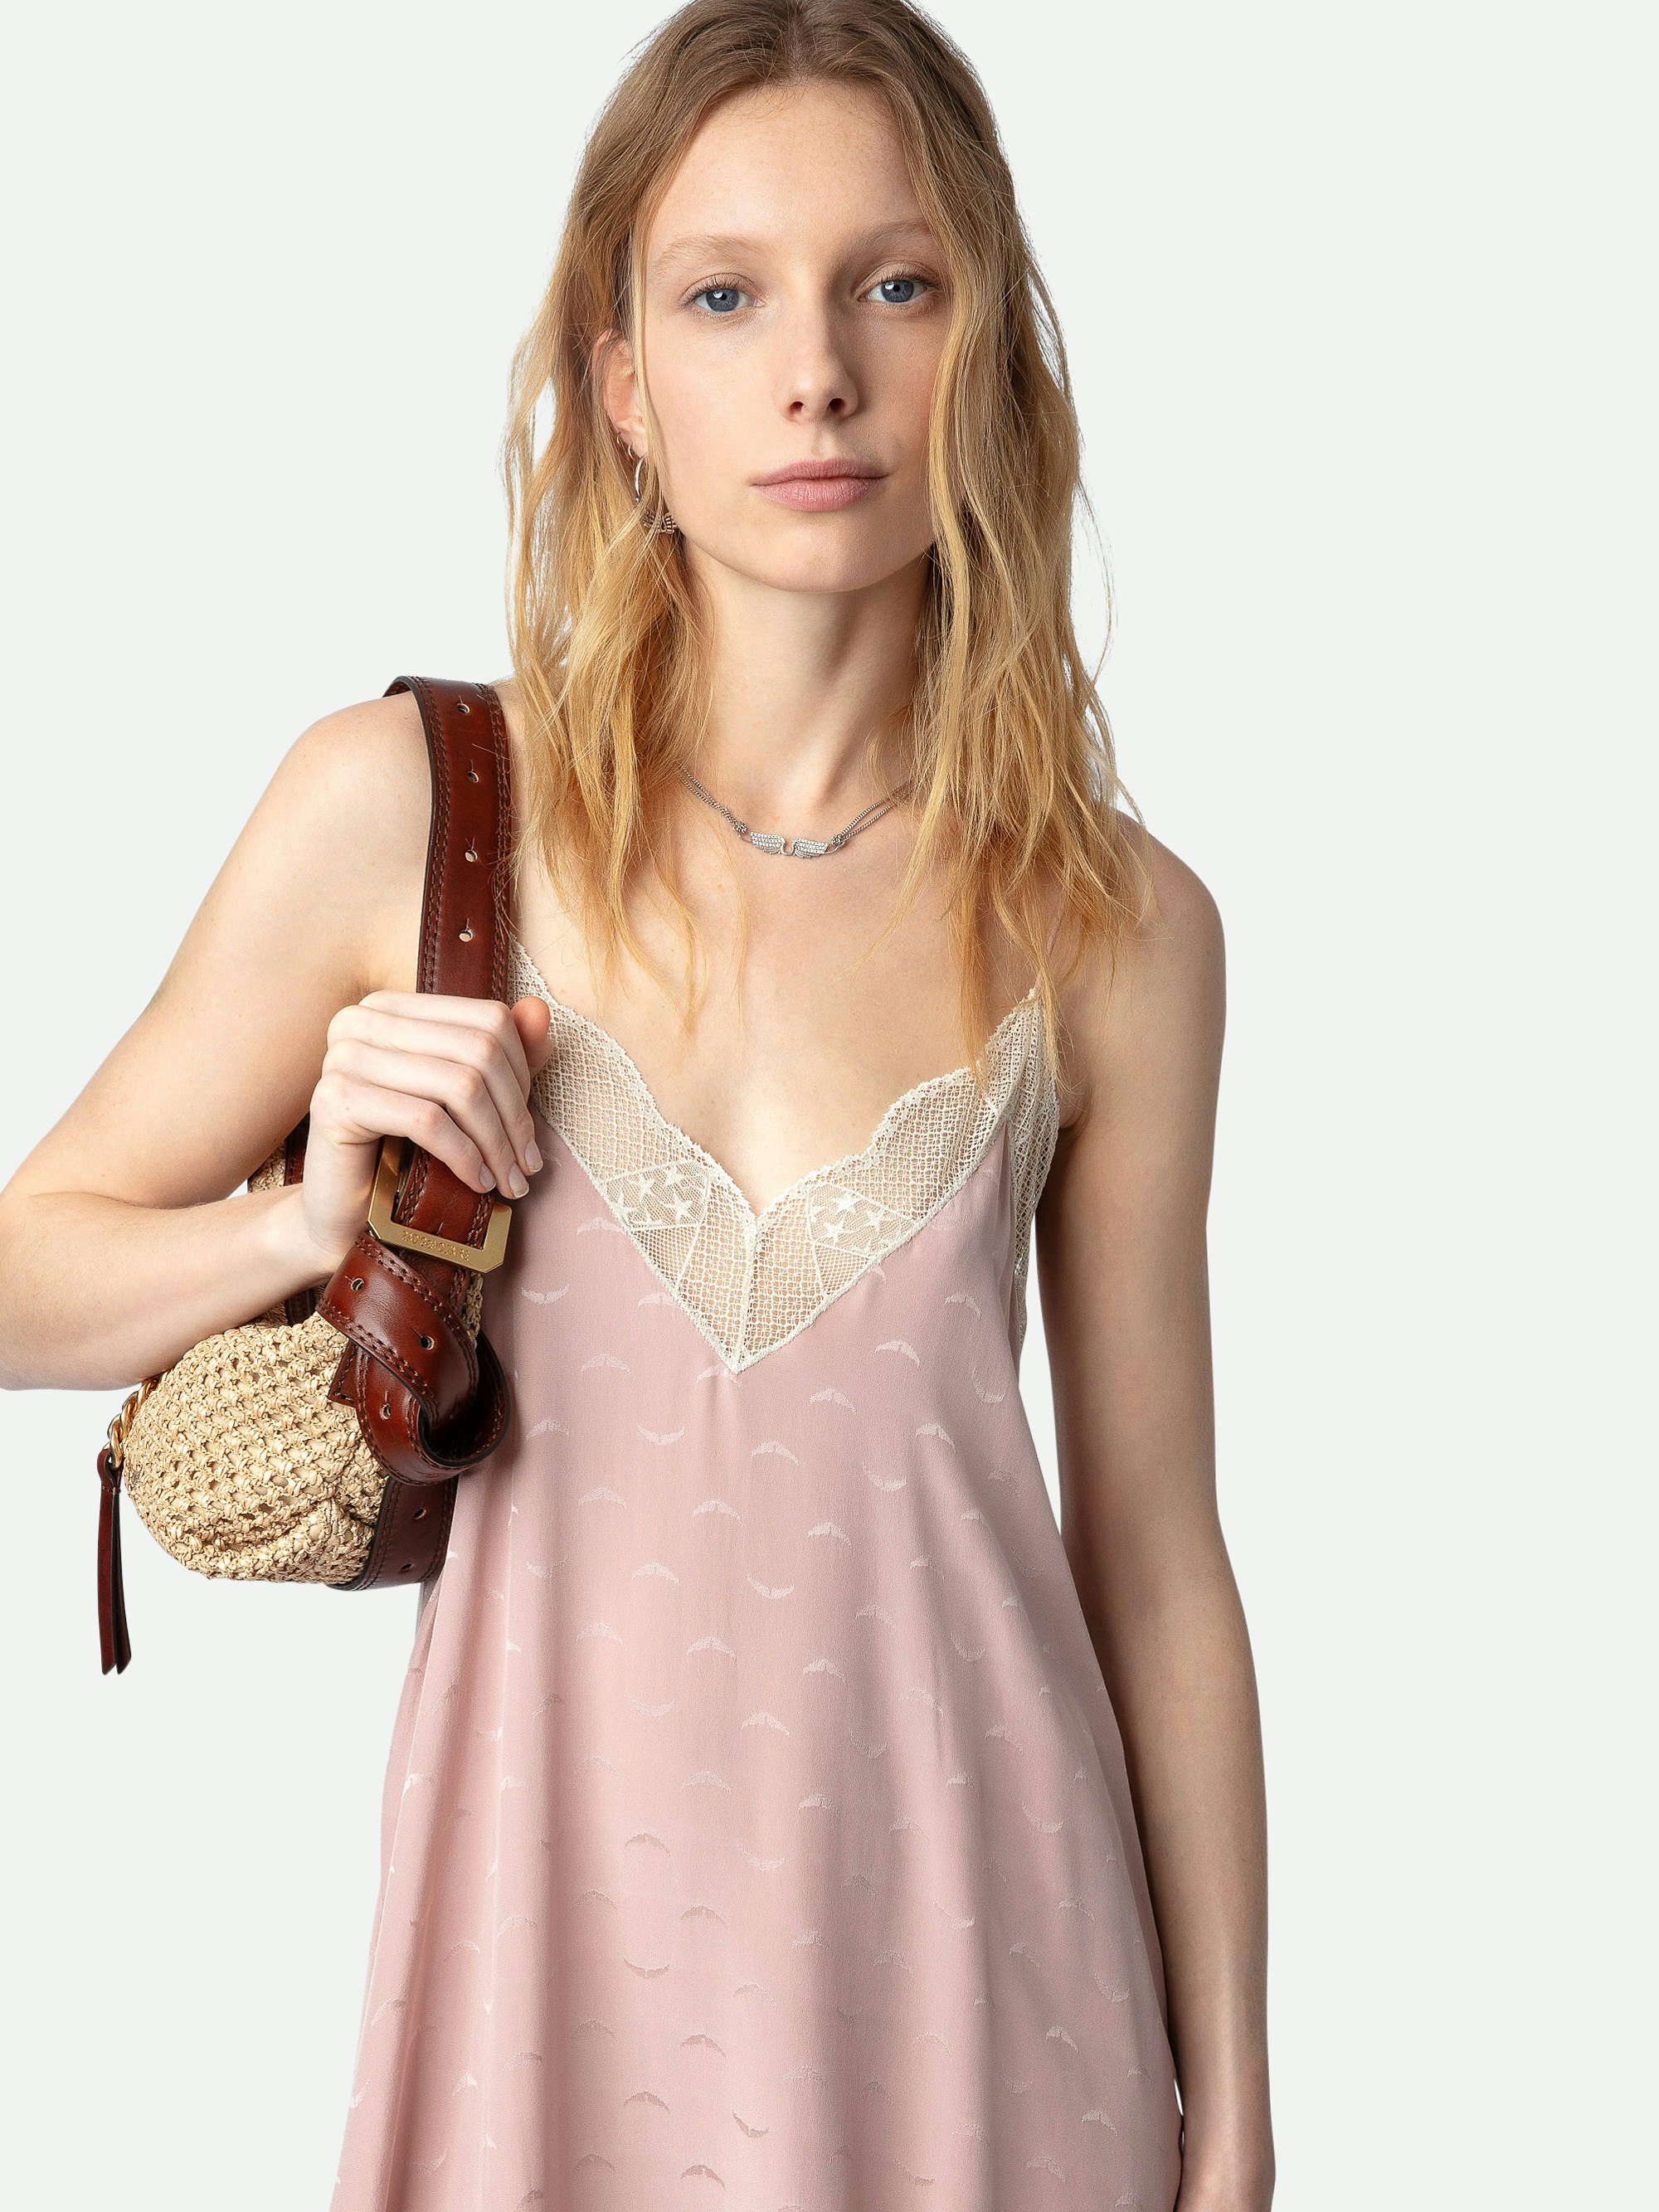 Risty Silk Jacquard Dress - Pink silk lingerie-style long dress with jacquard wings, thin straps and lace-trimmed neckline.